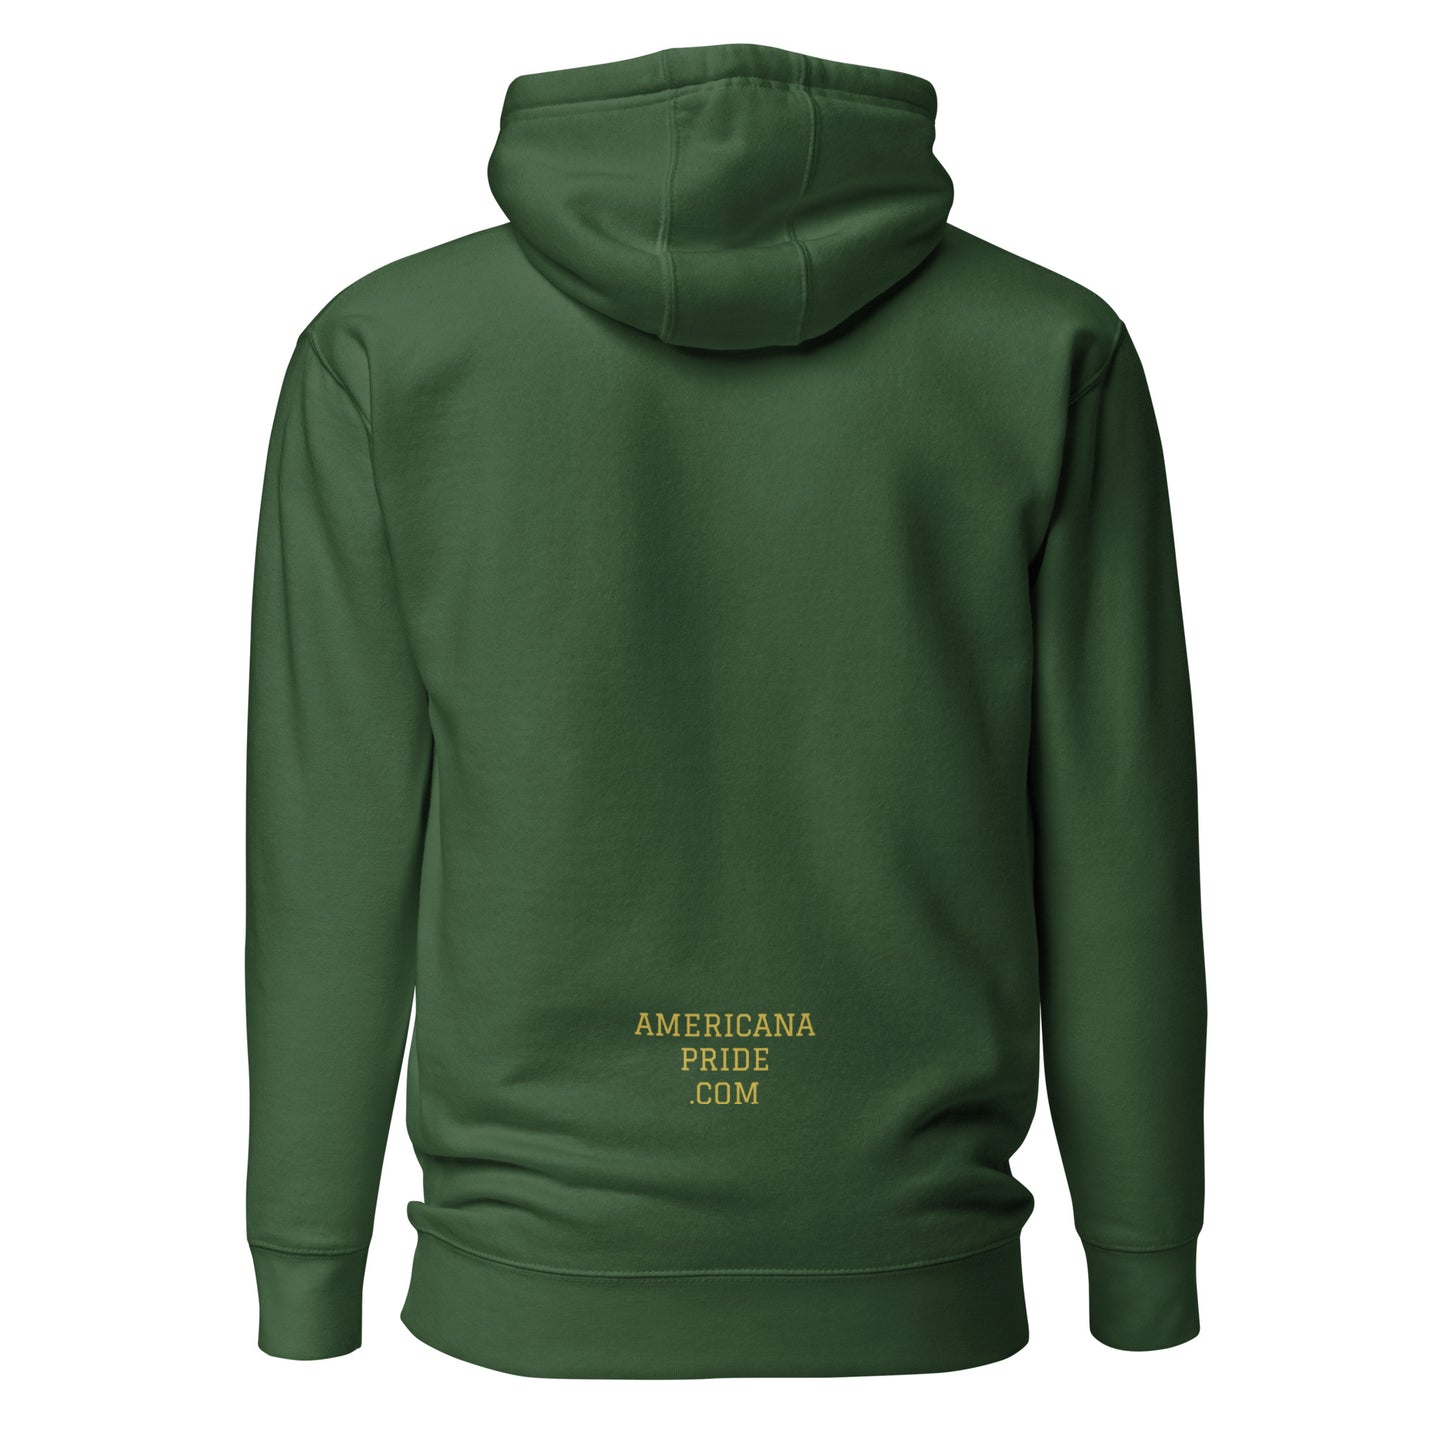 Are you AWAKE? Unisex Hoodie (gold lettering)